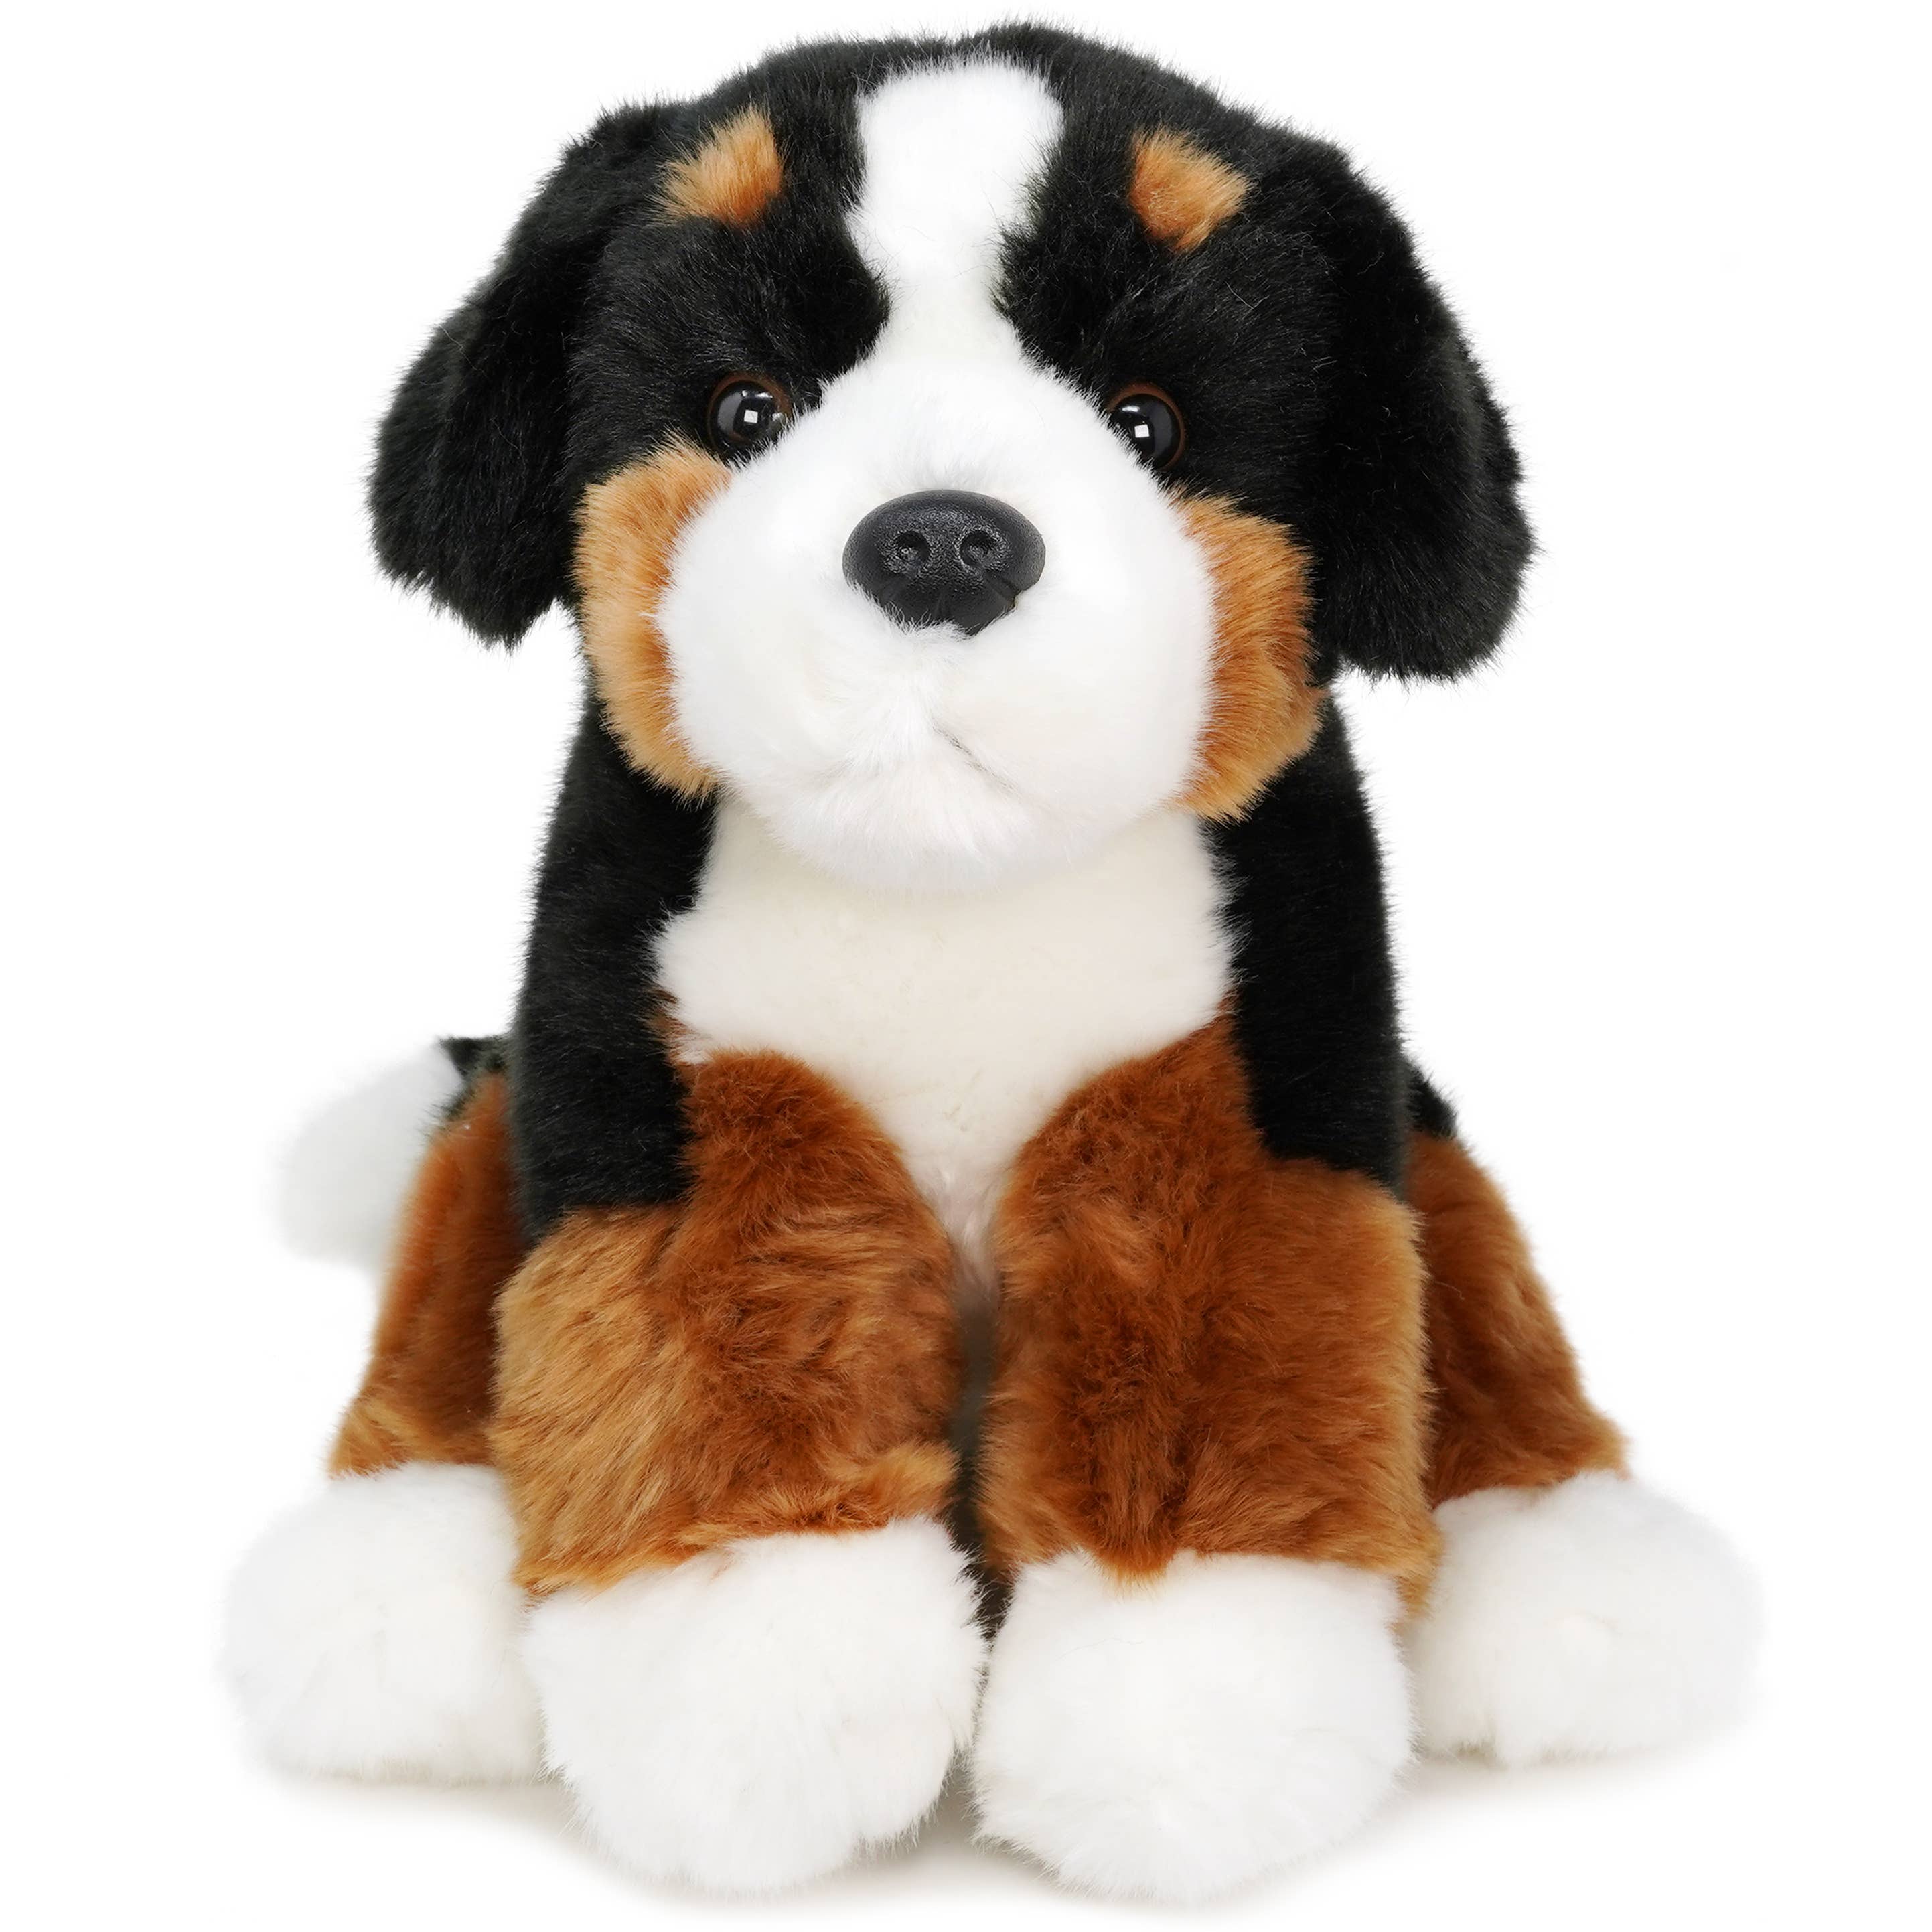  PixieCrush Dog Stuffed Animals Set of 5 with Stuffed Dog and 4  Puppies, Bernese Dog Plush with Zippered Belly That fits her Puppy  plushies, Ideal Gift for 3 Year Old Girl